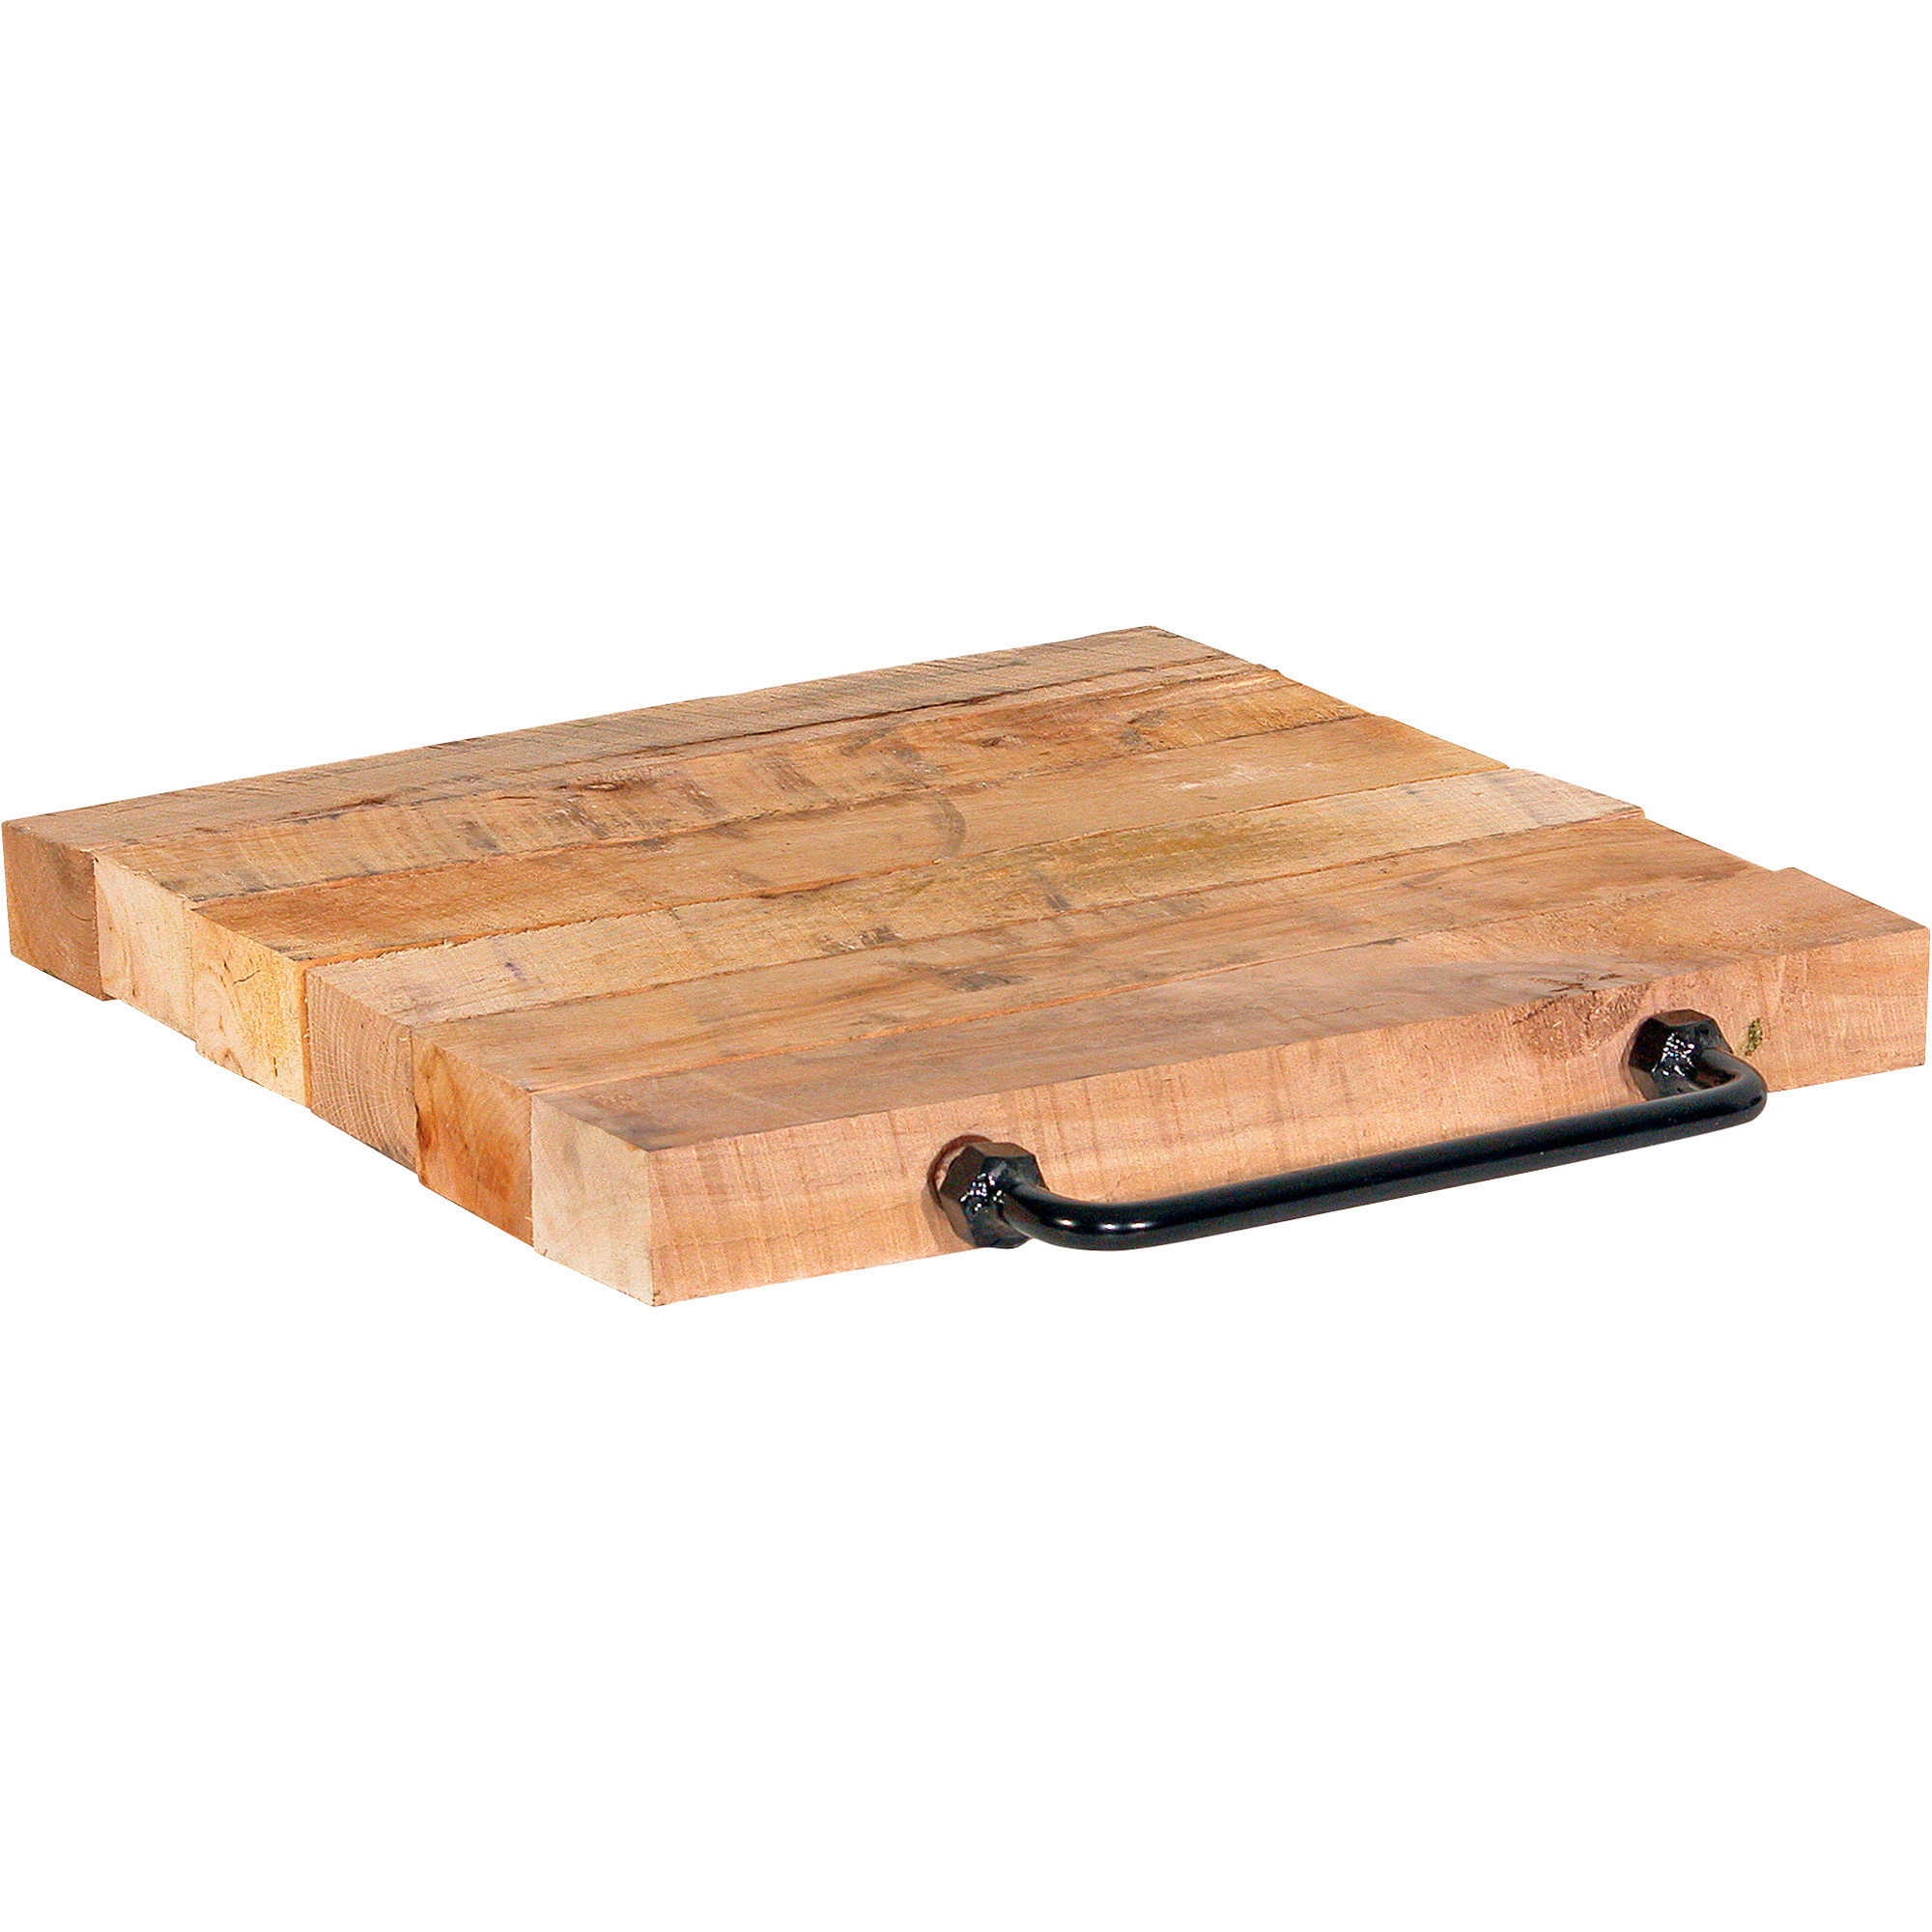 Buyers Products Hardwood Outrigger Pad, 18Inch L x 18Inch W x 2Inch D, Model OP18X18